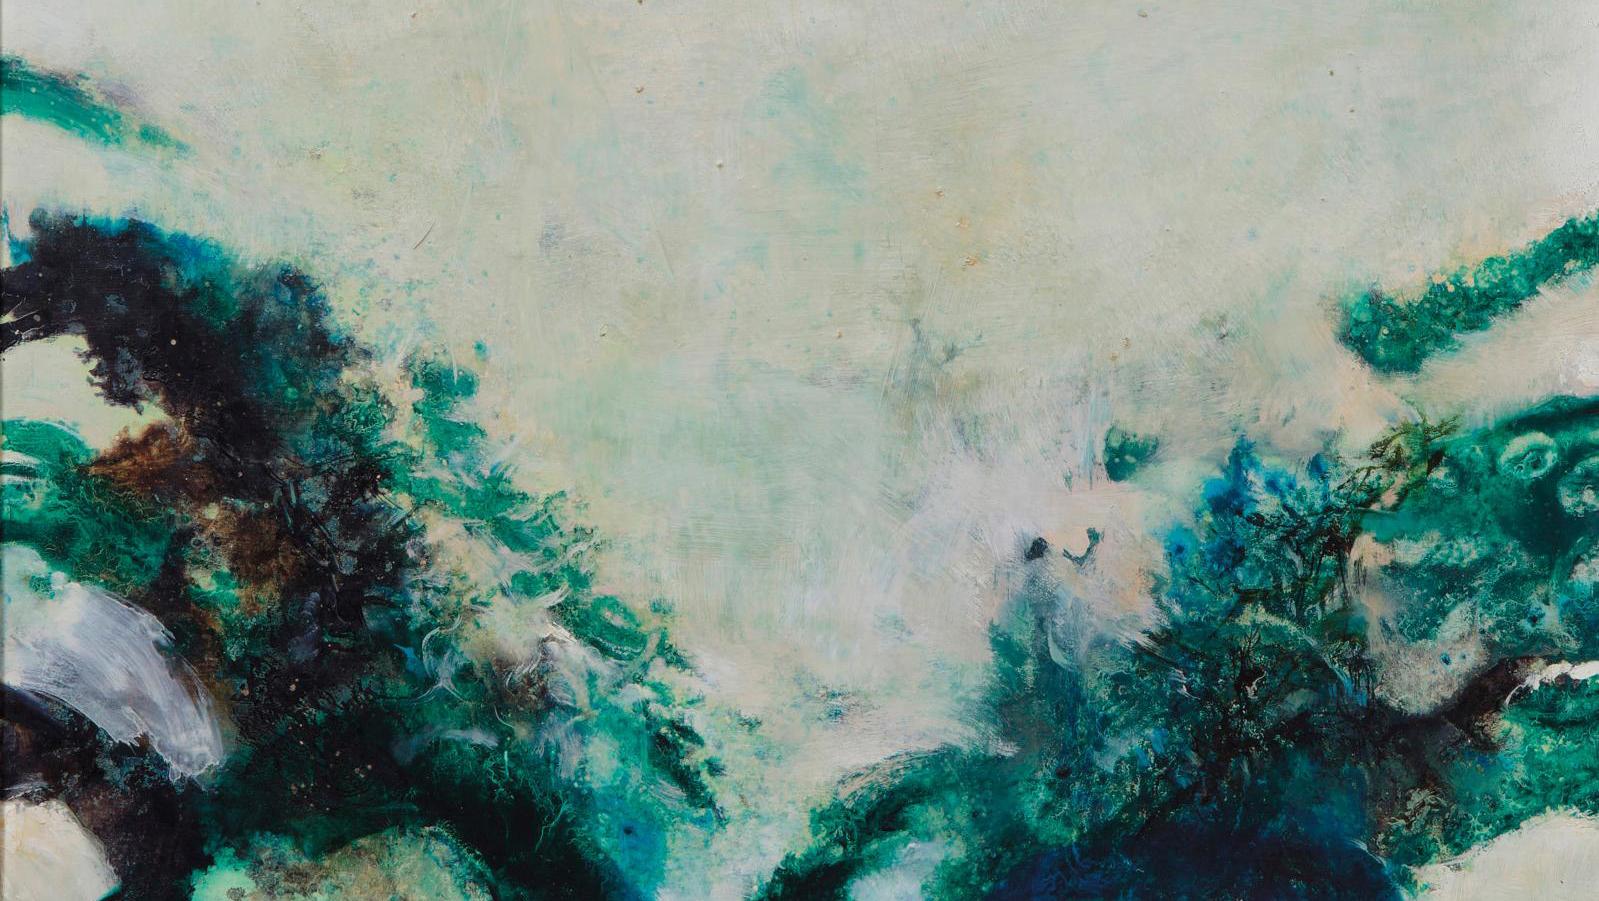 Zao Wou-ki (1920-2013), 28.4.77, 1977, oil on canvas signed, titled and dated, 54... The “Empty” and the “Whole” by Zao Wou-ki